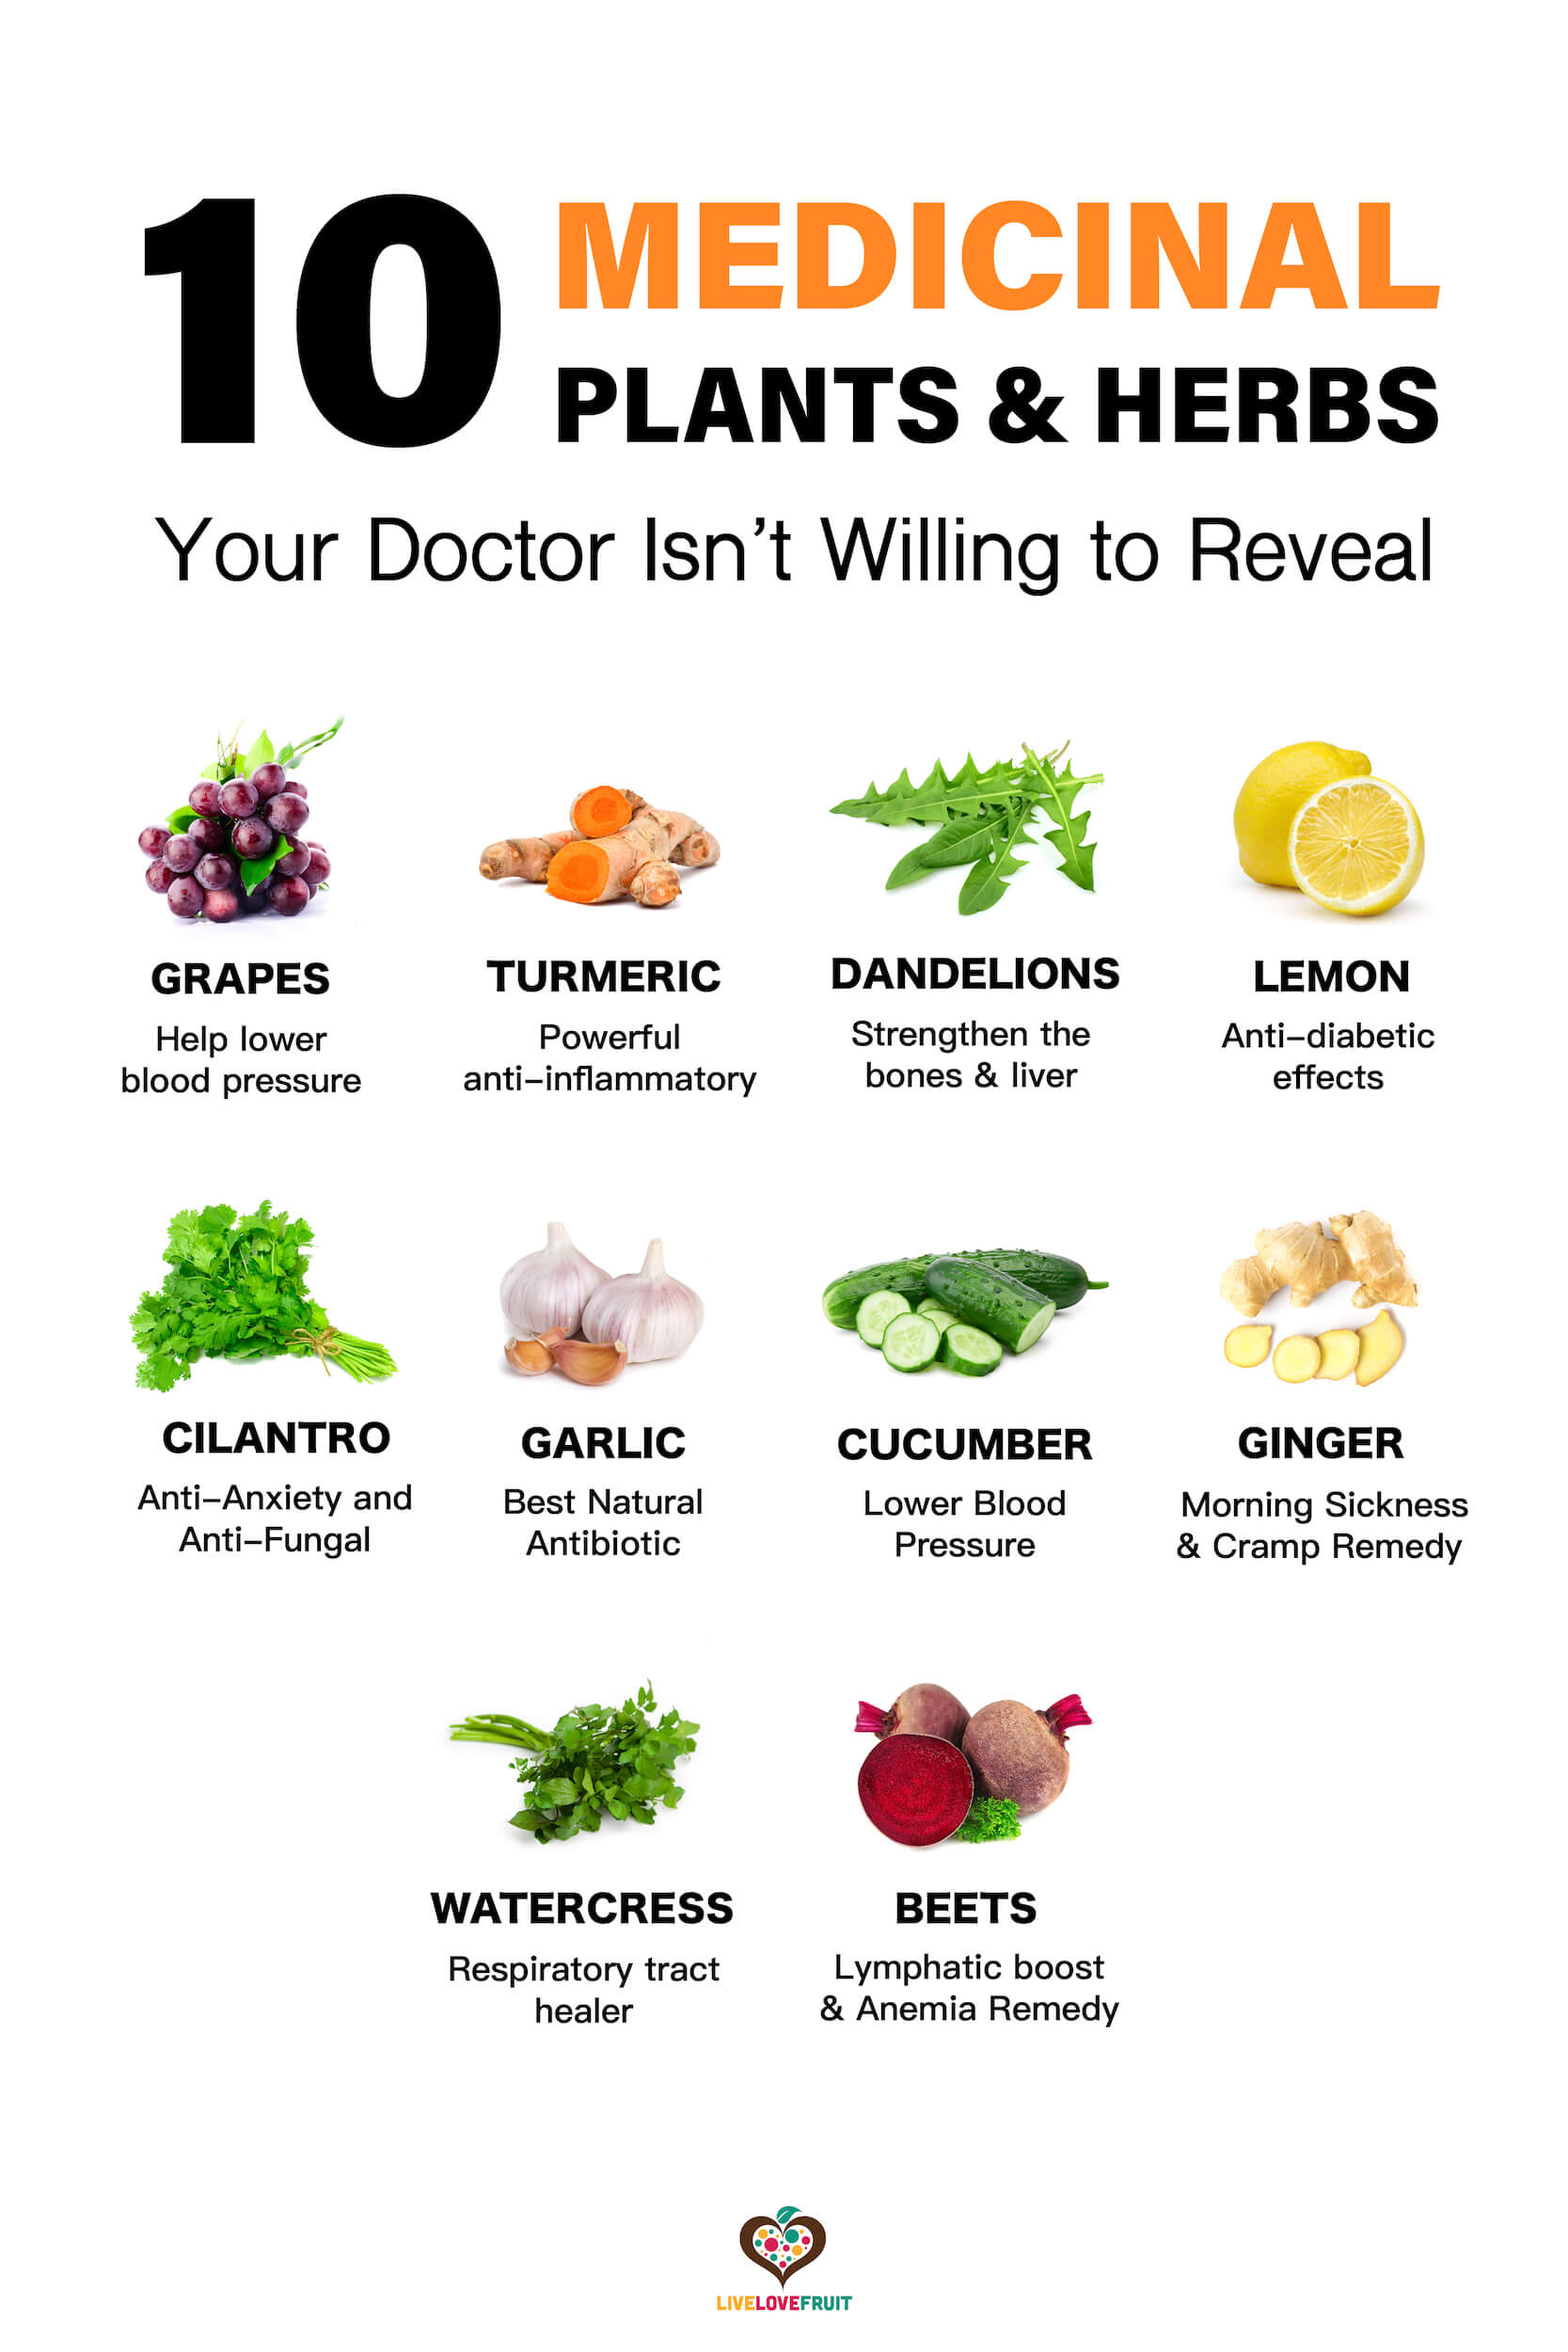 Visual graphic of medicinal plants and herbs that help heal the body with text - 10 medicinal plants and herbs your doctor isn't willing to reveal